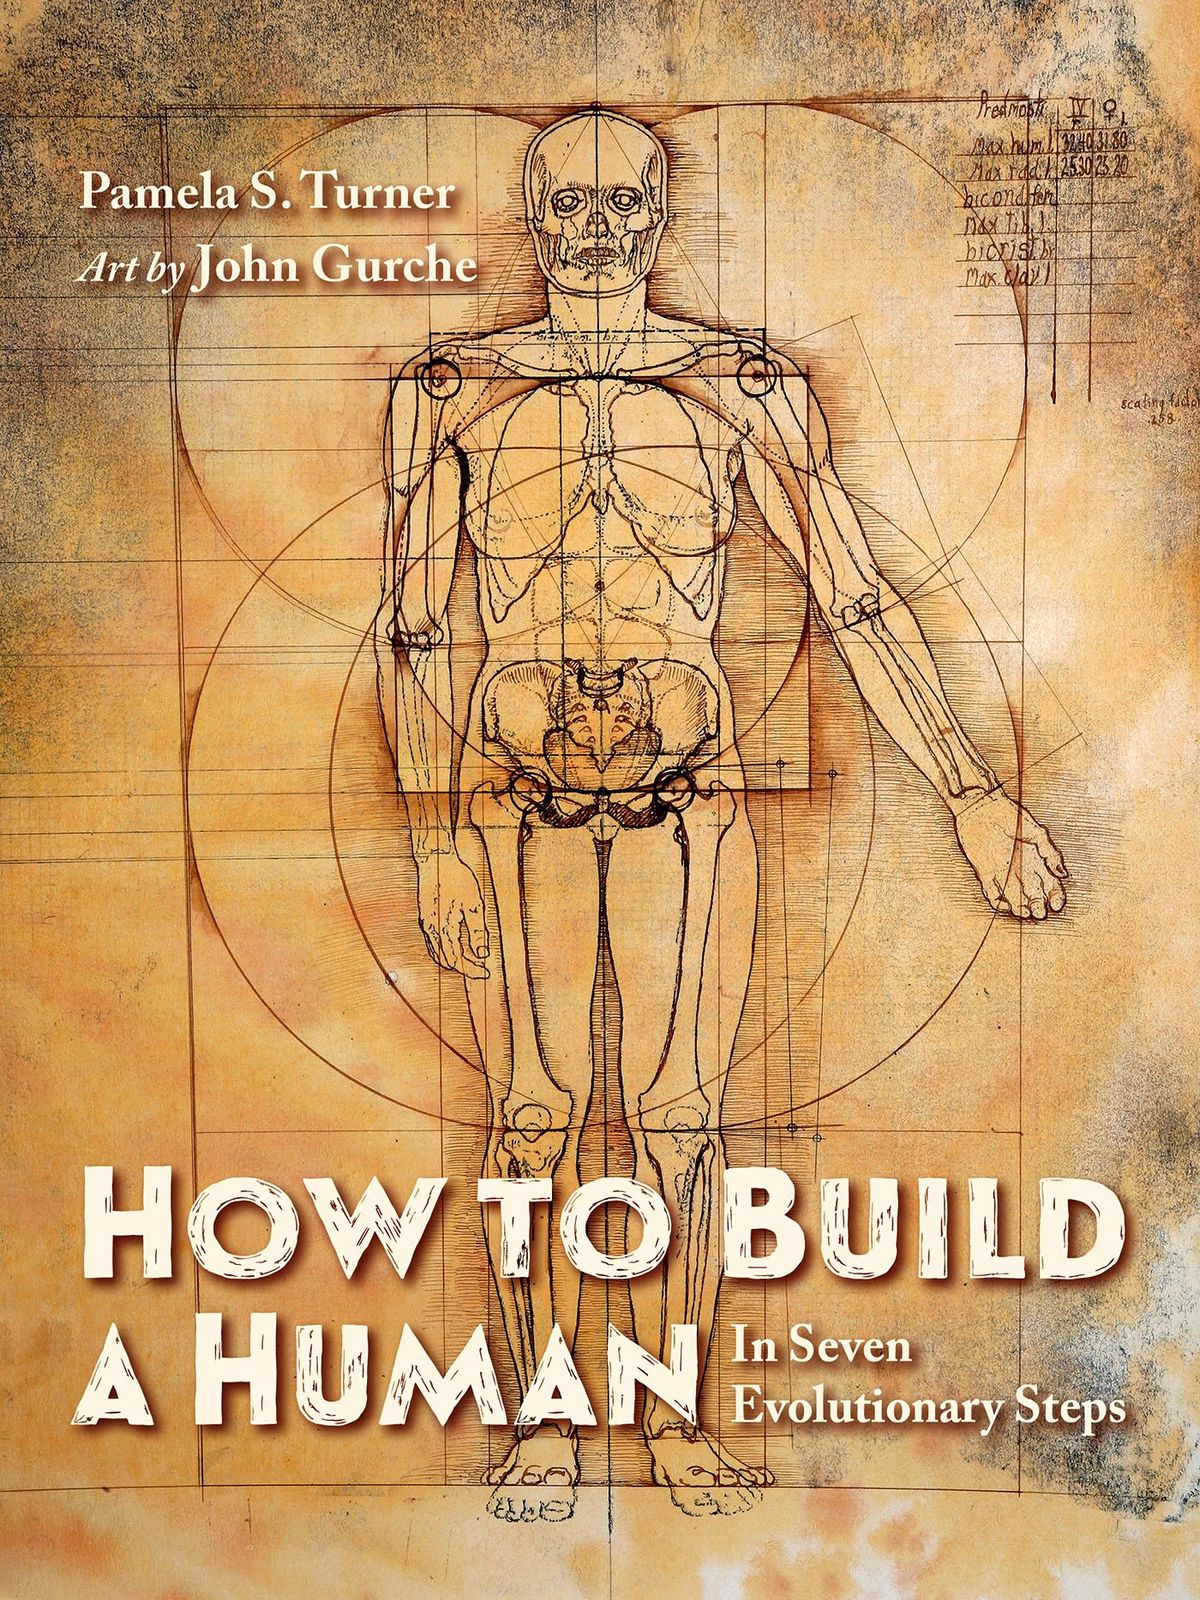 “How to Build a Human” by Pamela S. Turner.  (Courtesy of Charlesbridge)